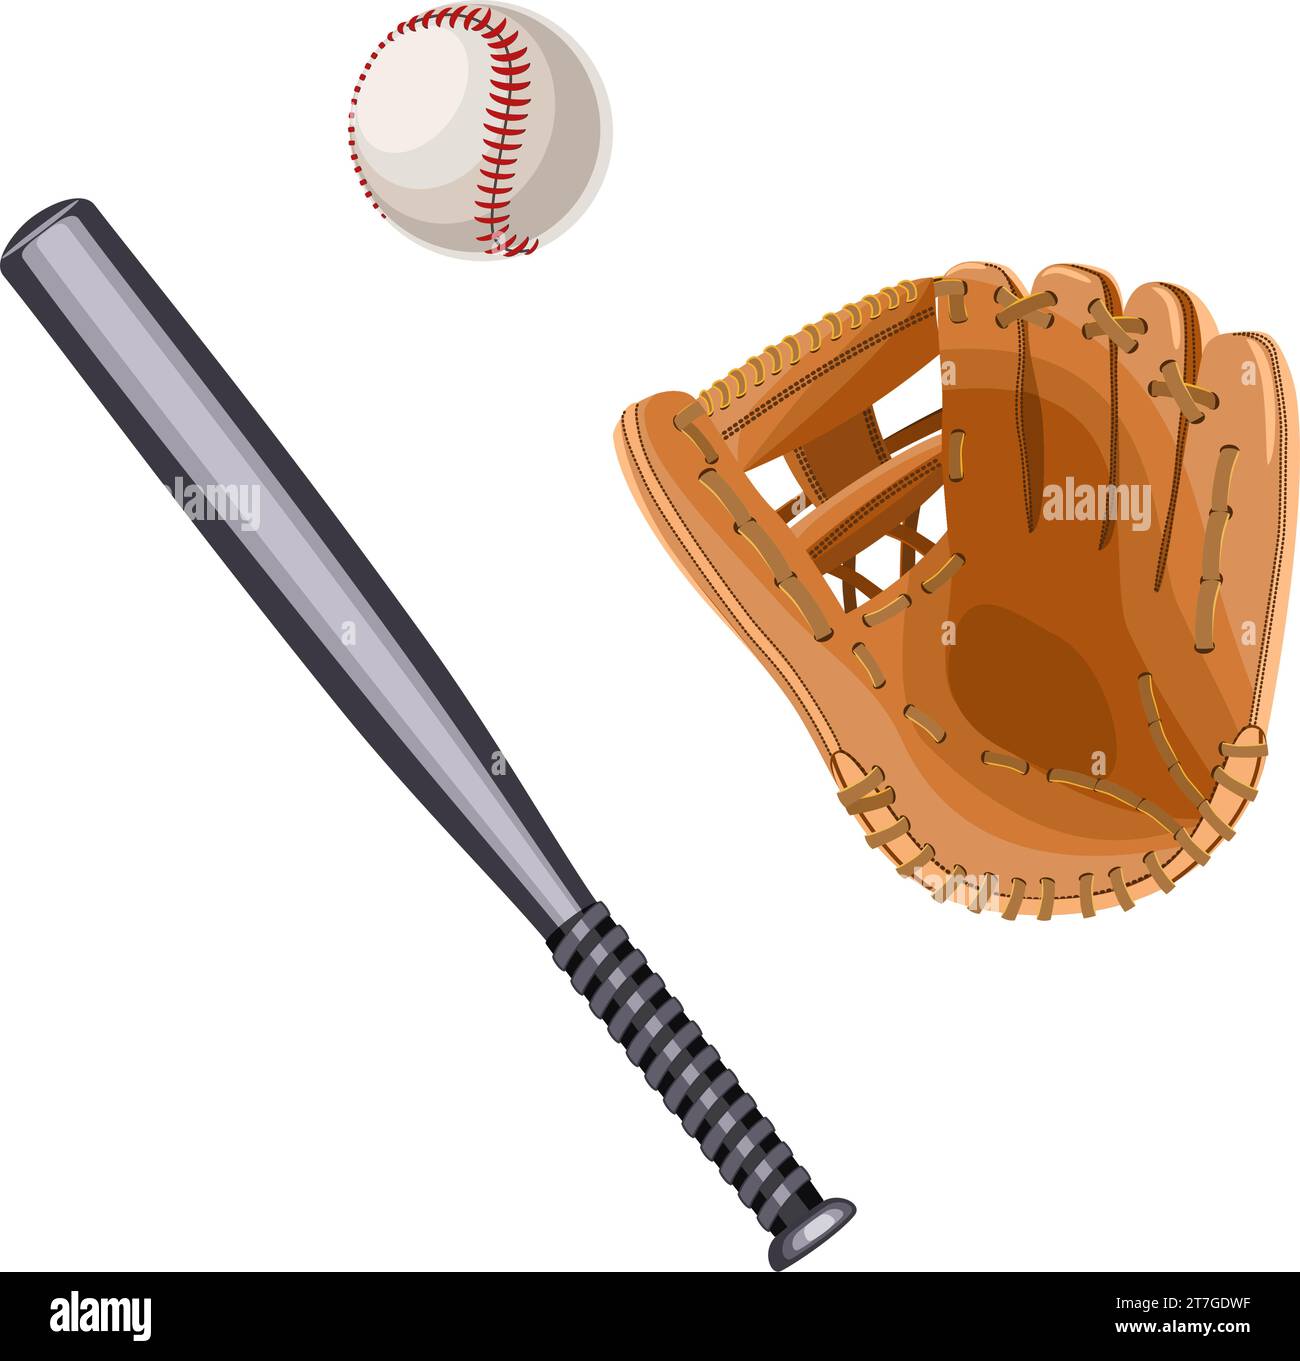 Baseball glove, ball and bat isolated on white background. Vector illustration Stock Vector